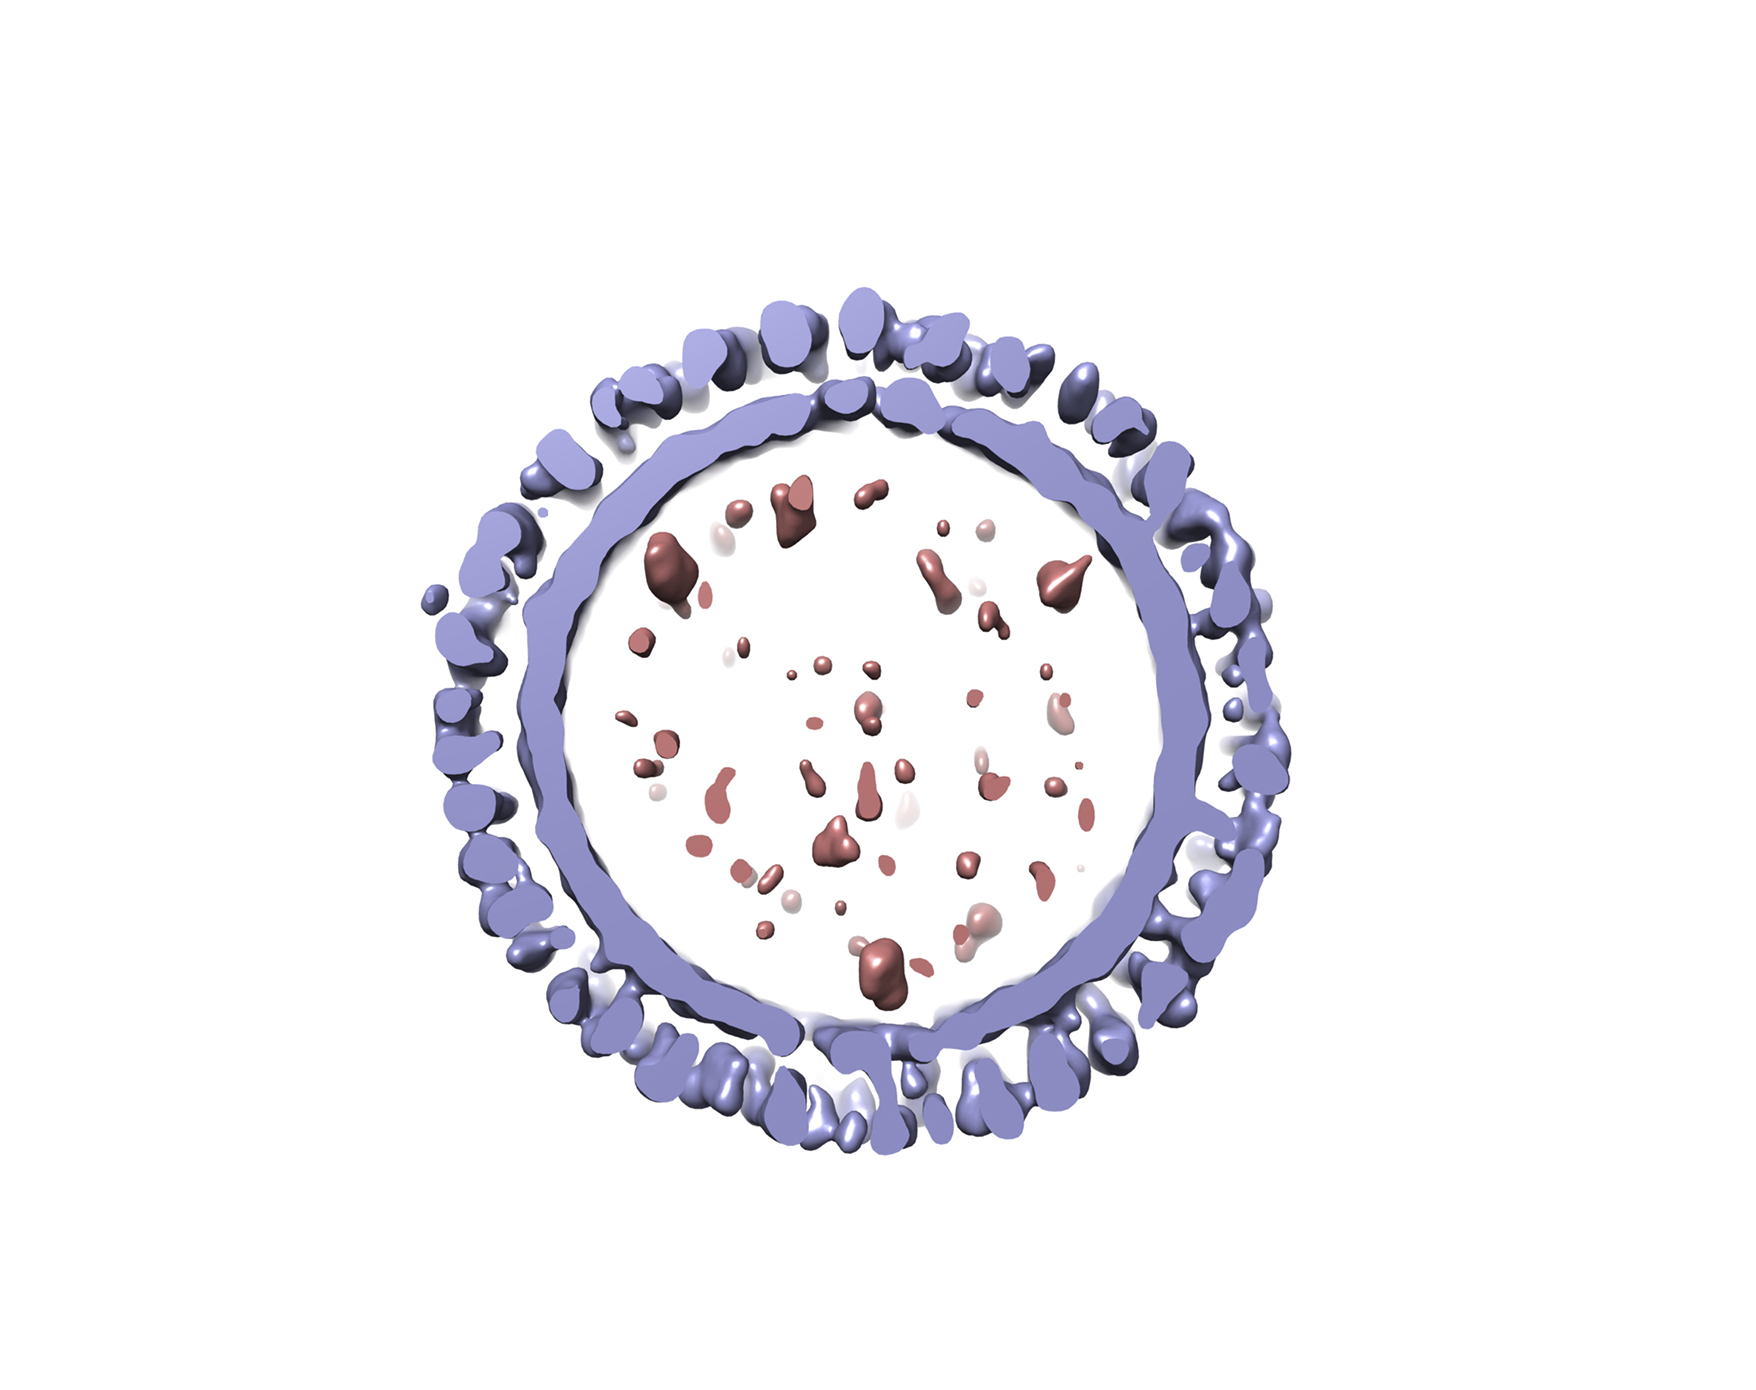 Image and rendering of 1918 influenza virus-like particle